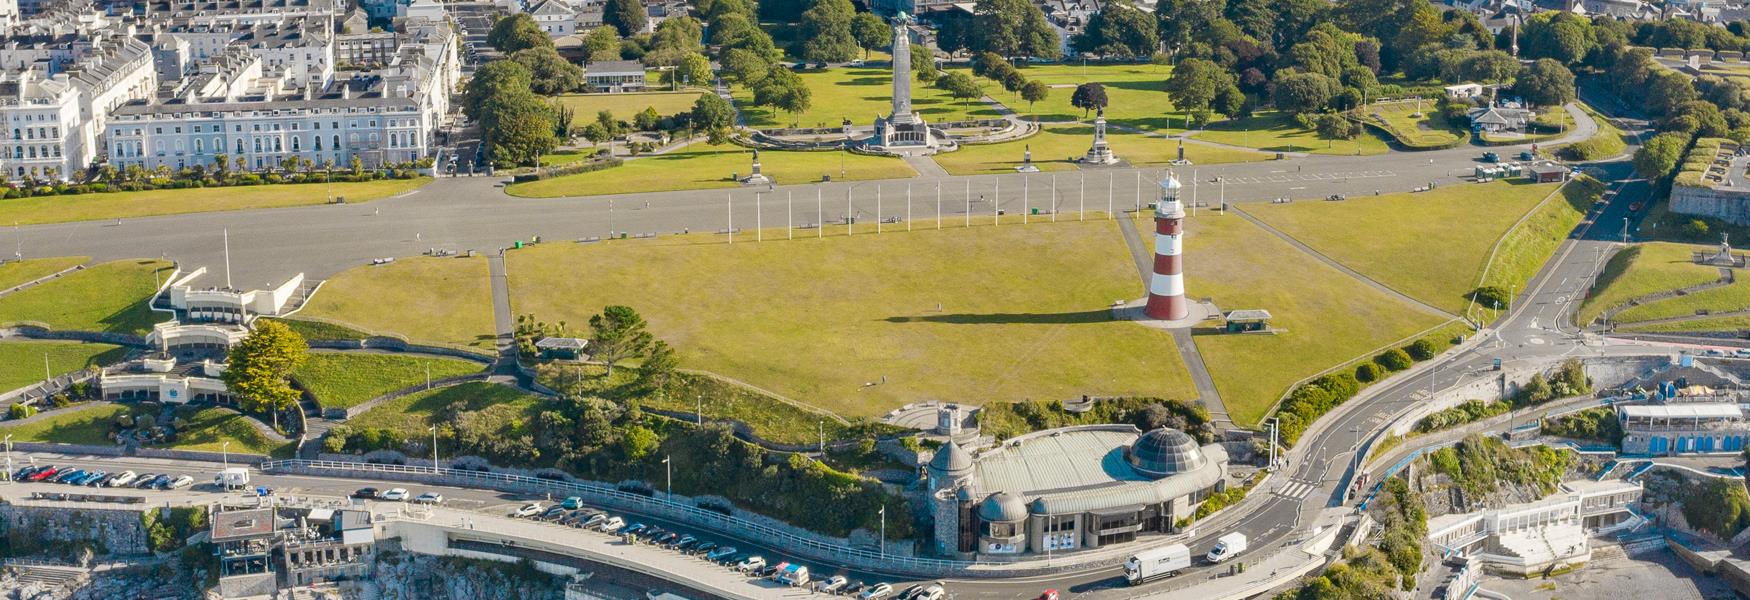 Aerial view of Plymouth Hoe